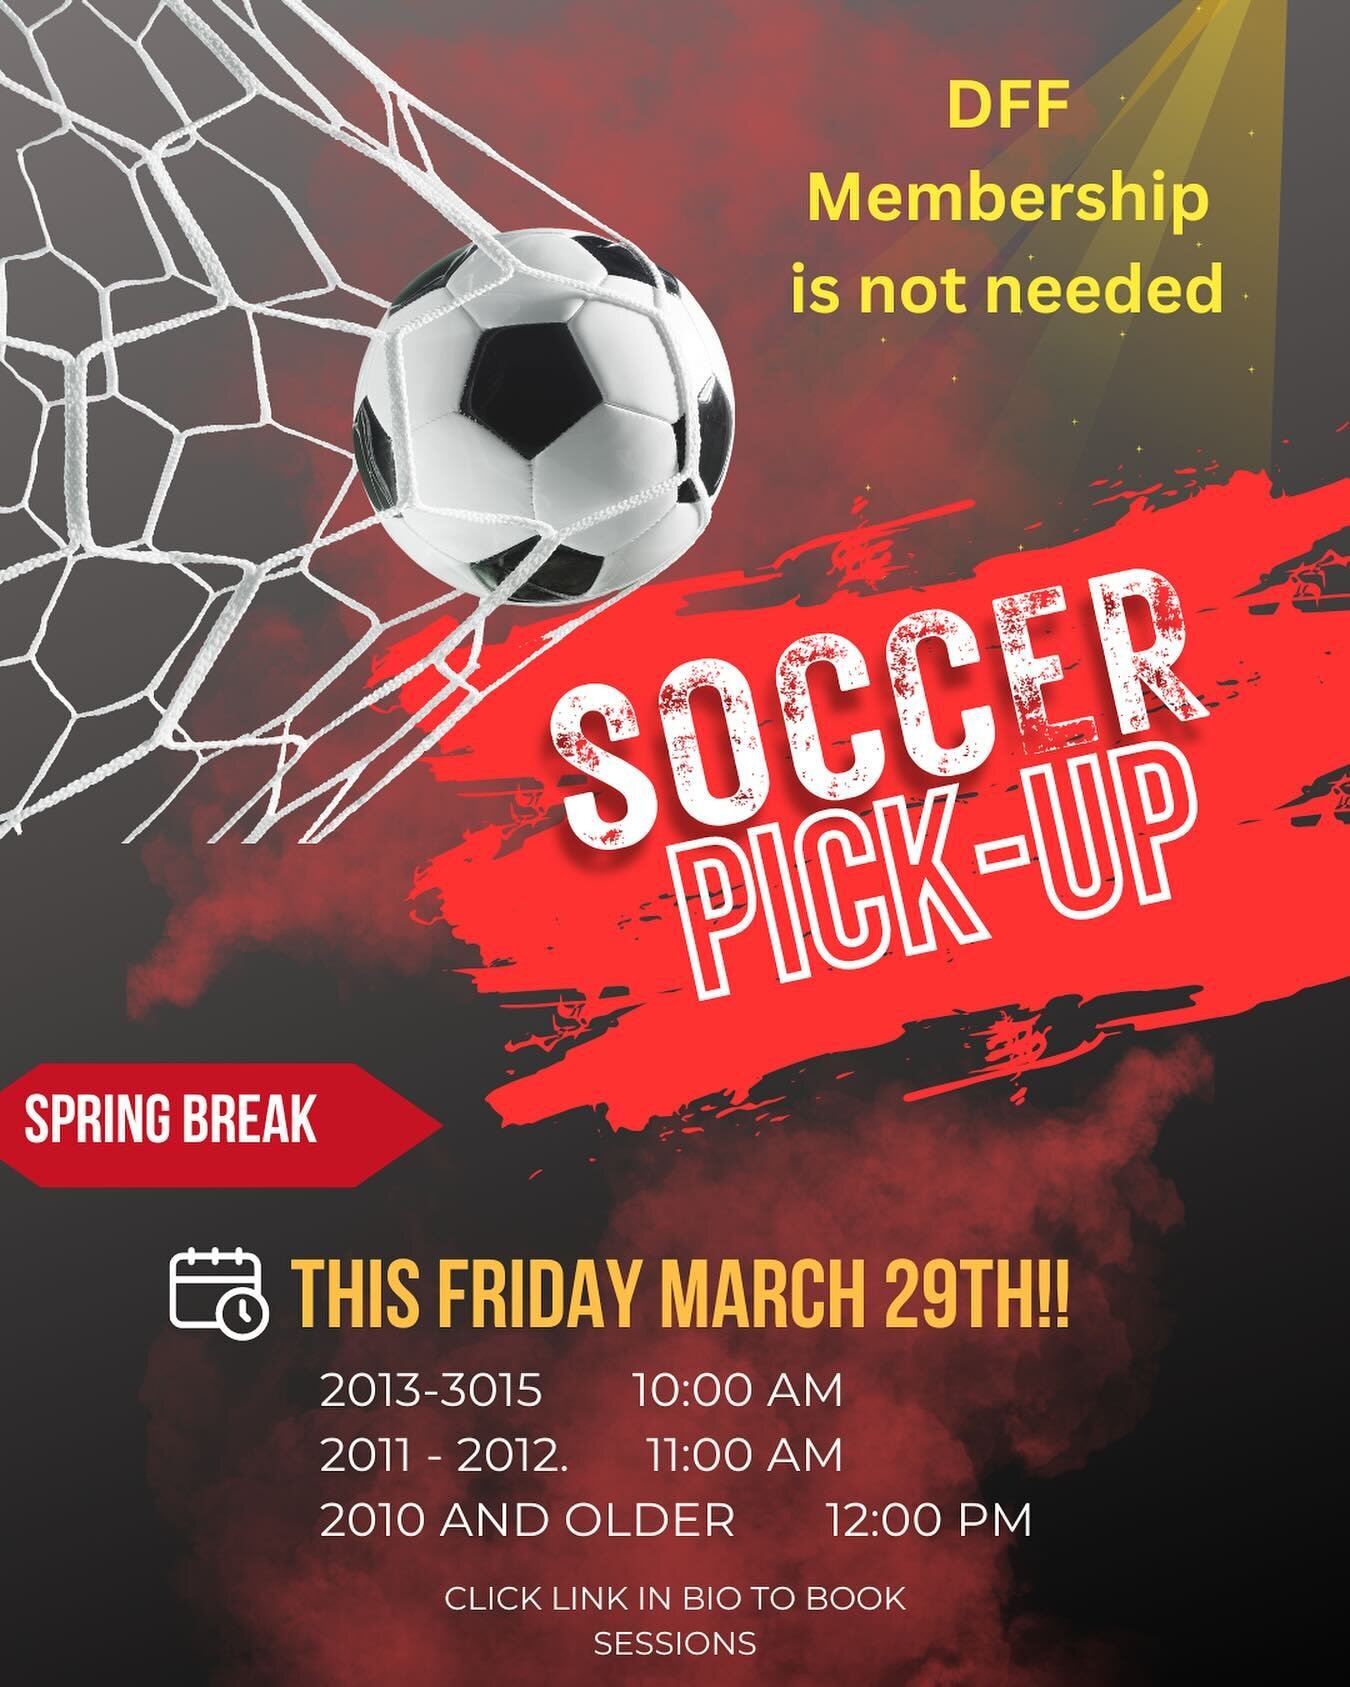 Join us this week on Friday for Soccer Pick Up!! DFF membership is not required. Link in bio and on our website to reserve a spot!